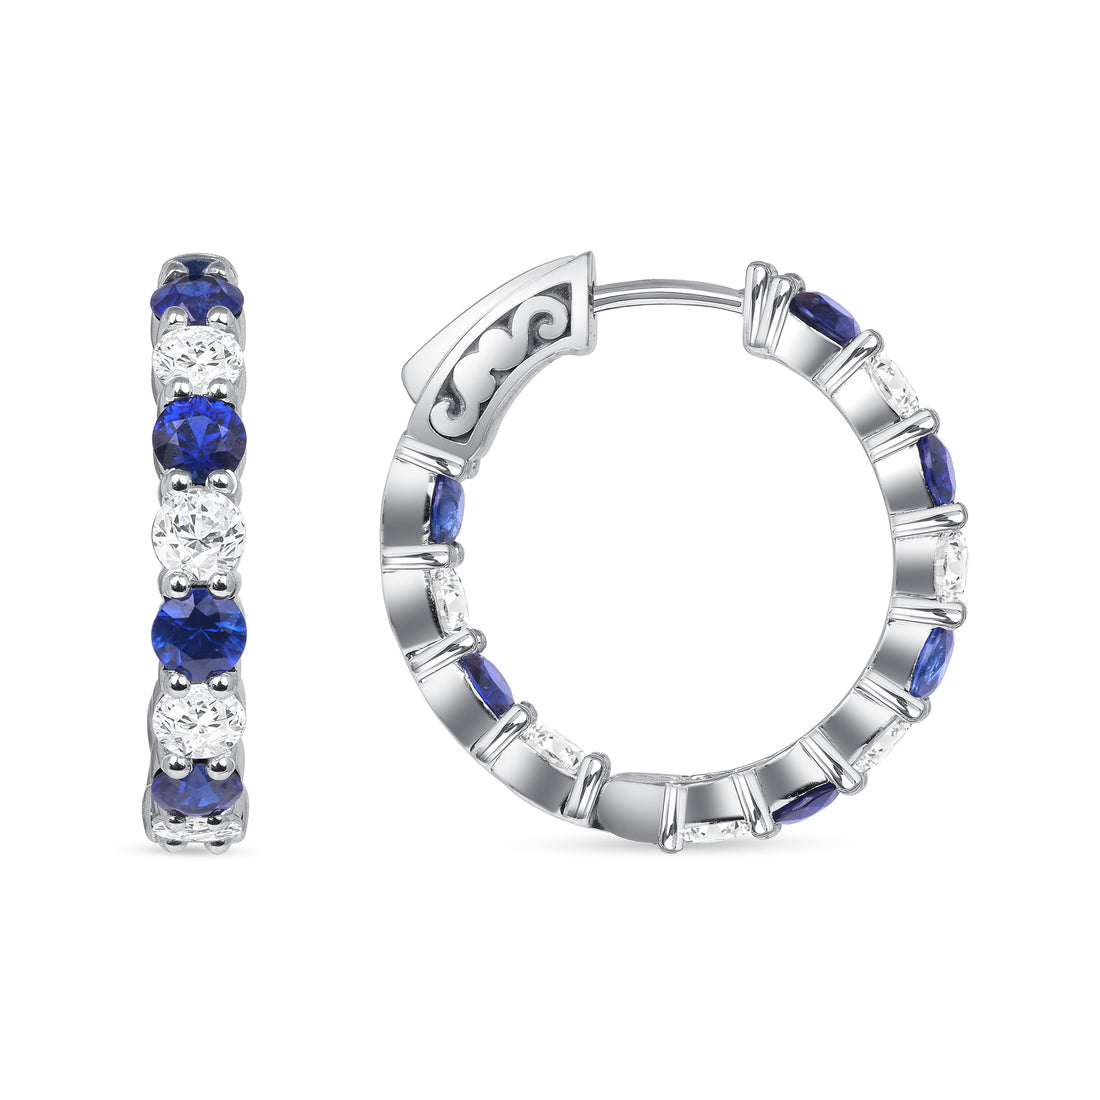 3.9 CT. Alternating Round Brilliant Blue Sapphire and Diamond Hoop Earrings in 14k White Gold